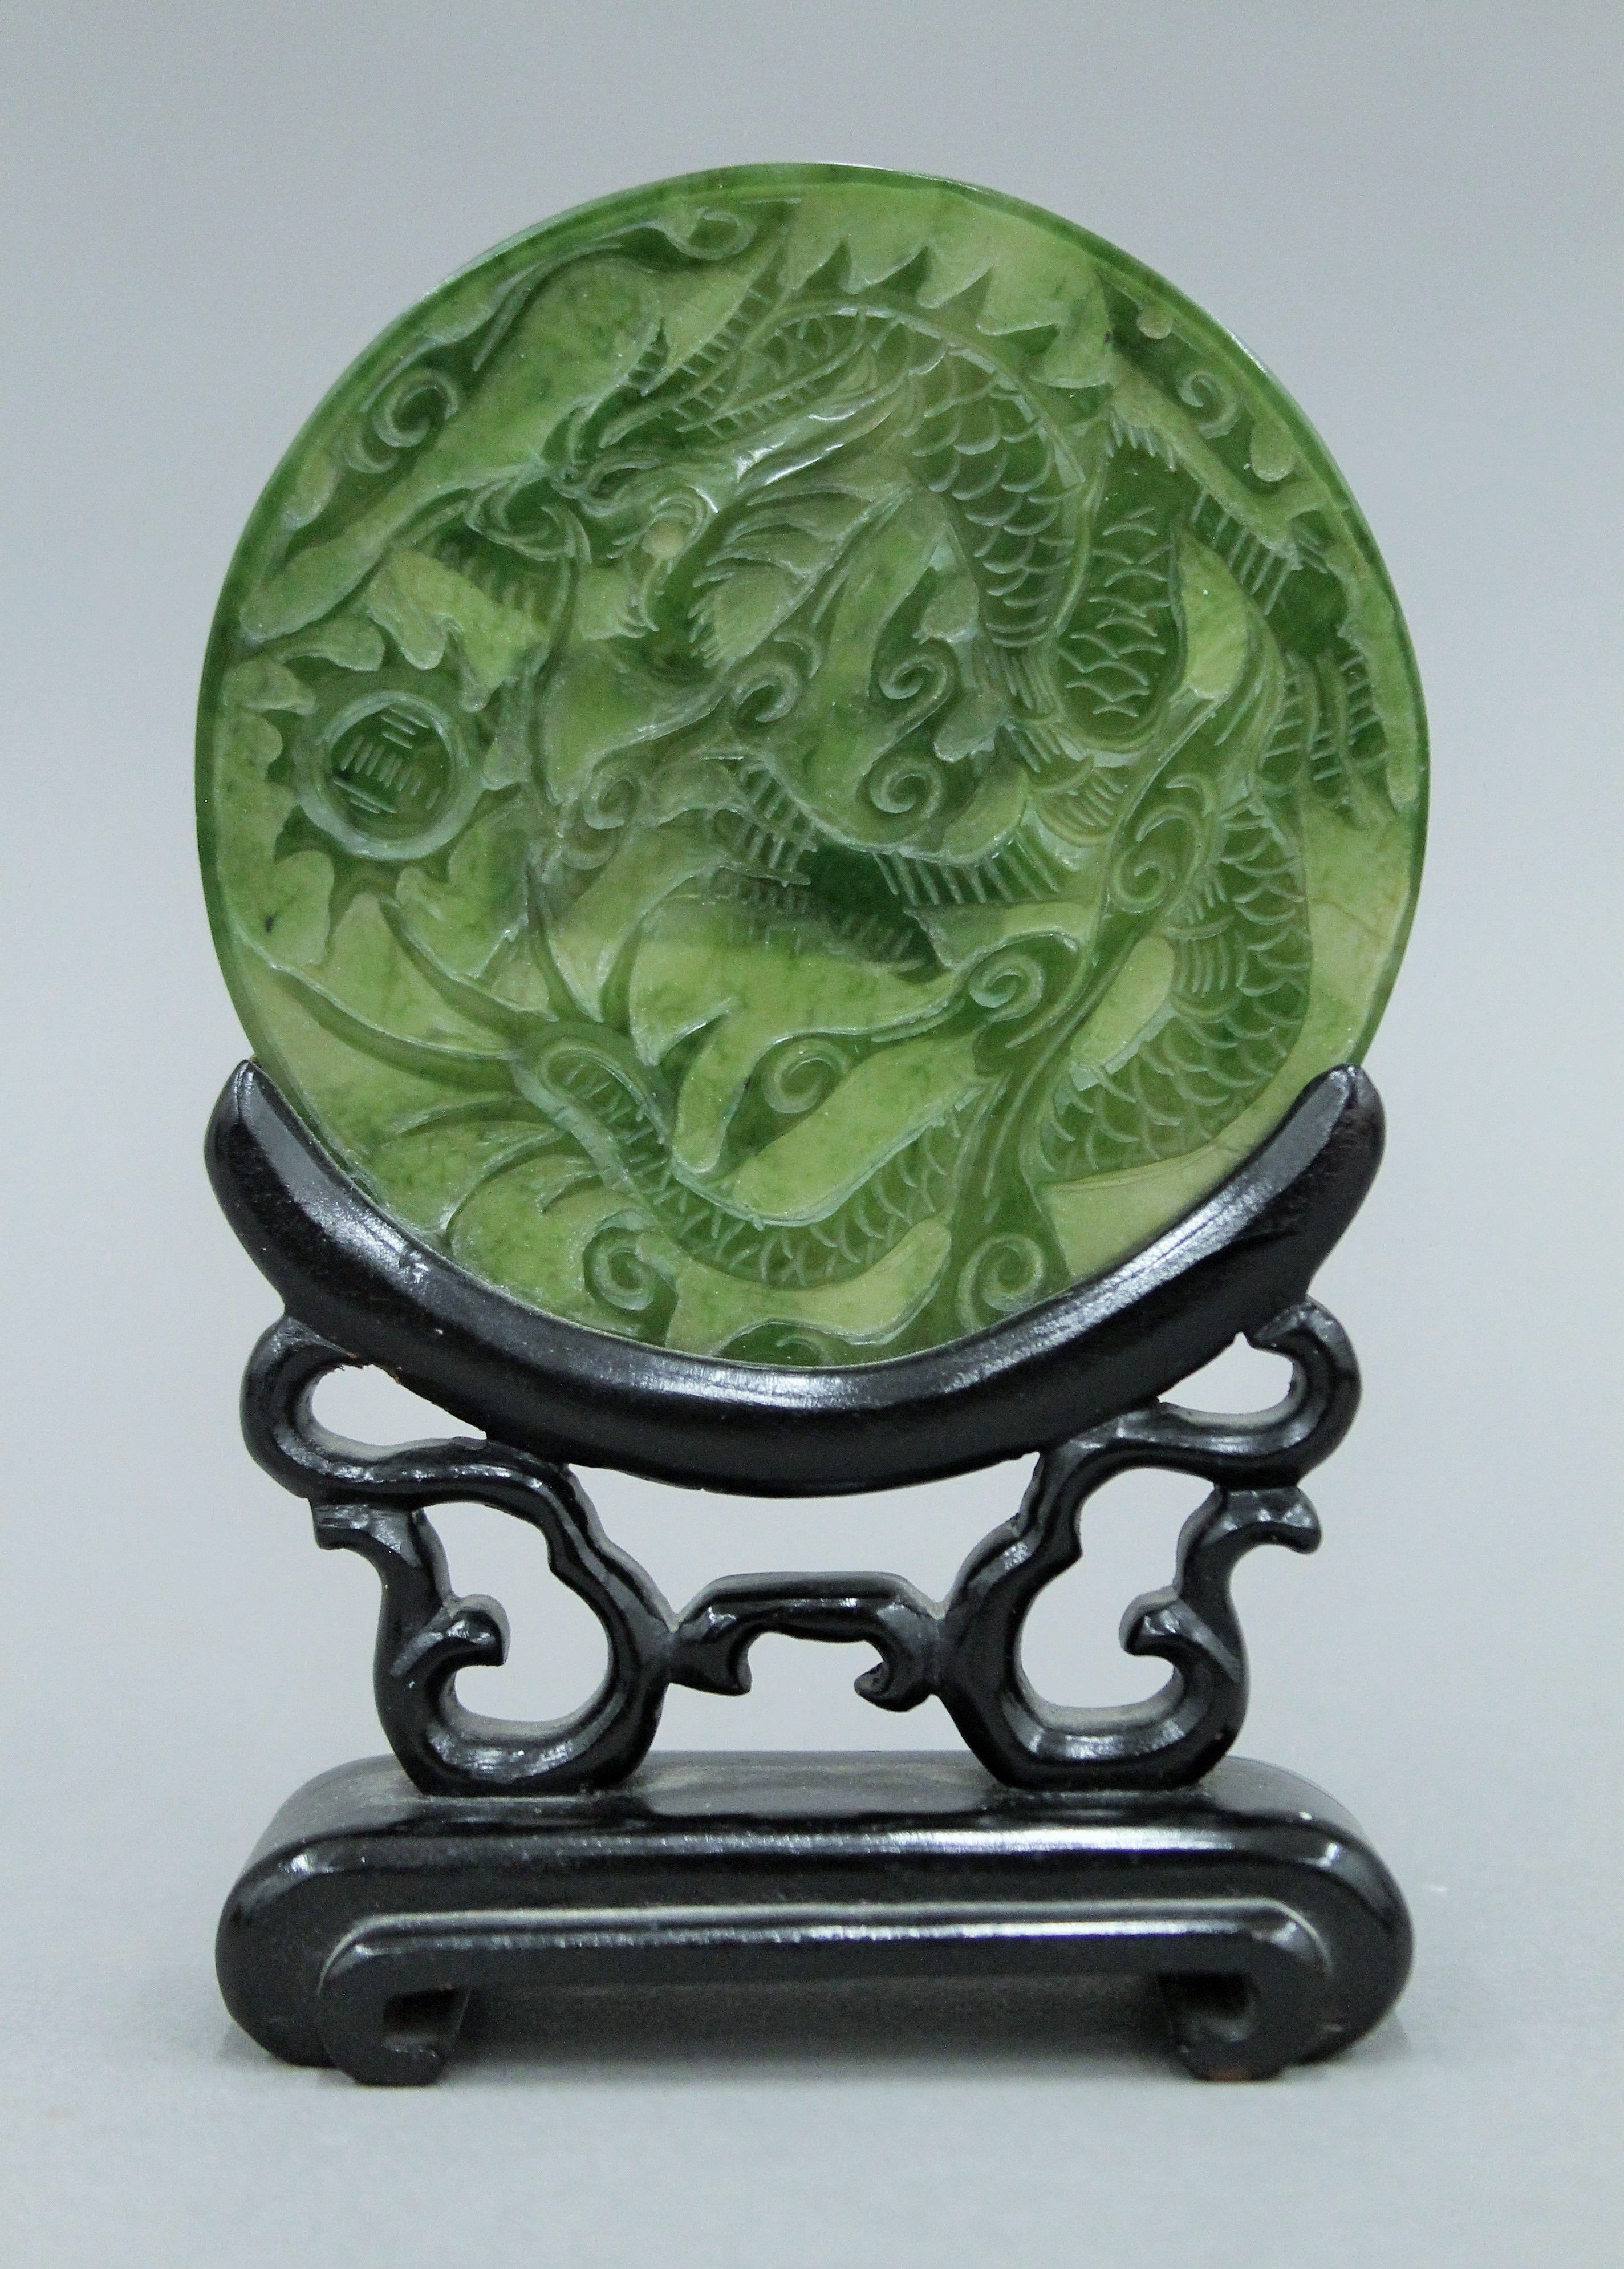 A small Chinese carved spinach jade disc on carved wooden stand. 13.5 cm high.